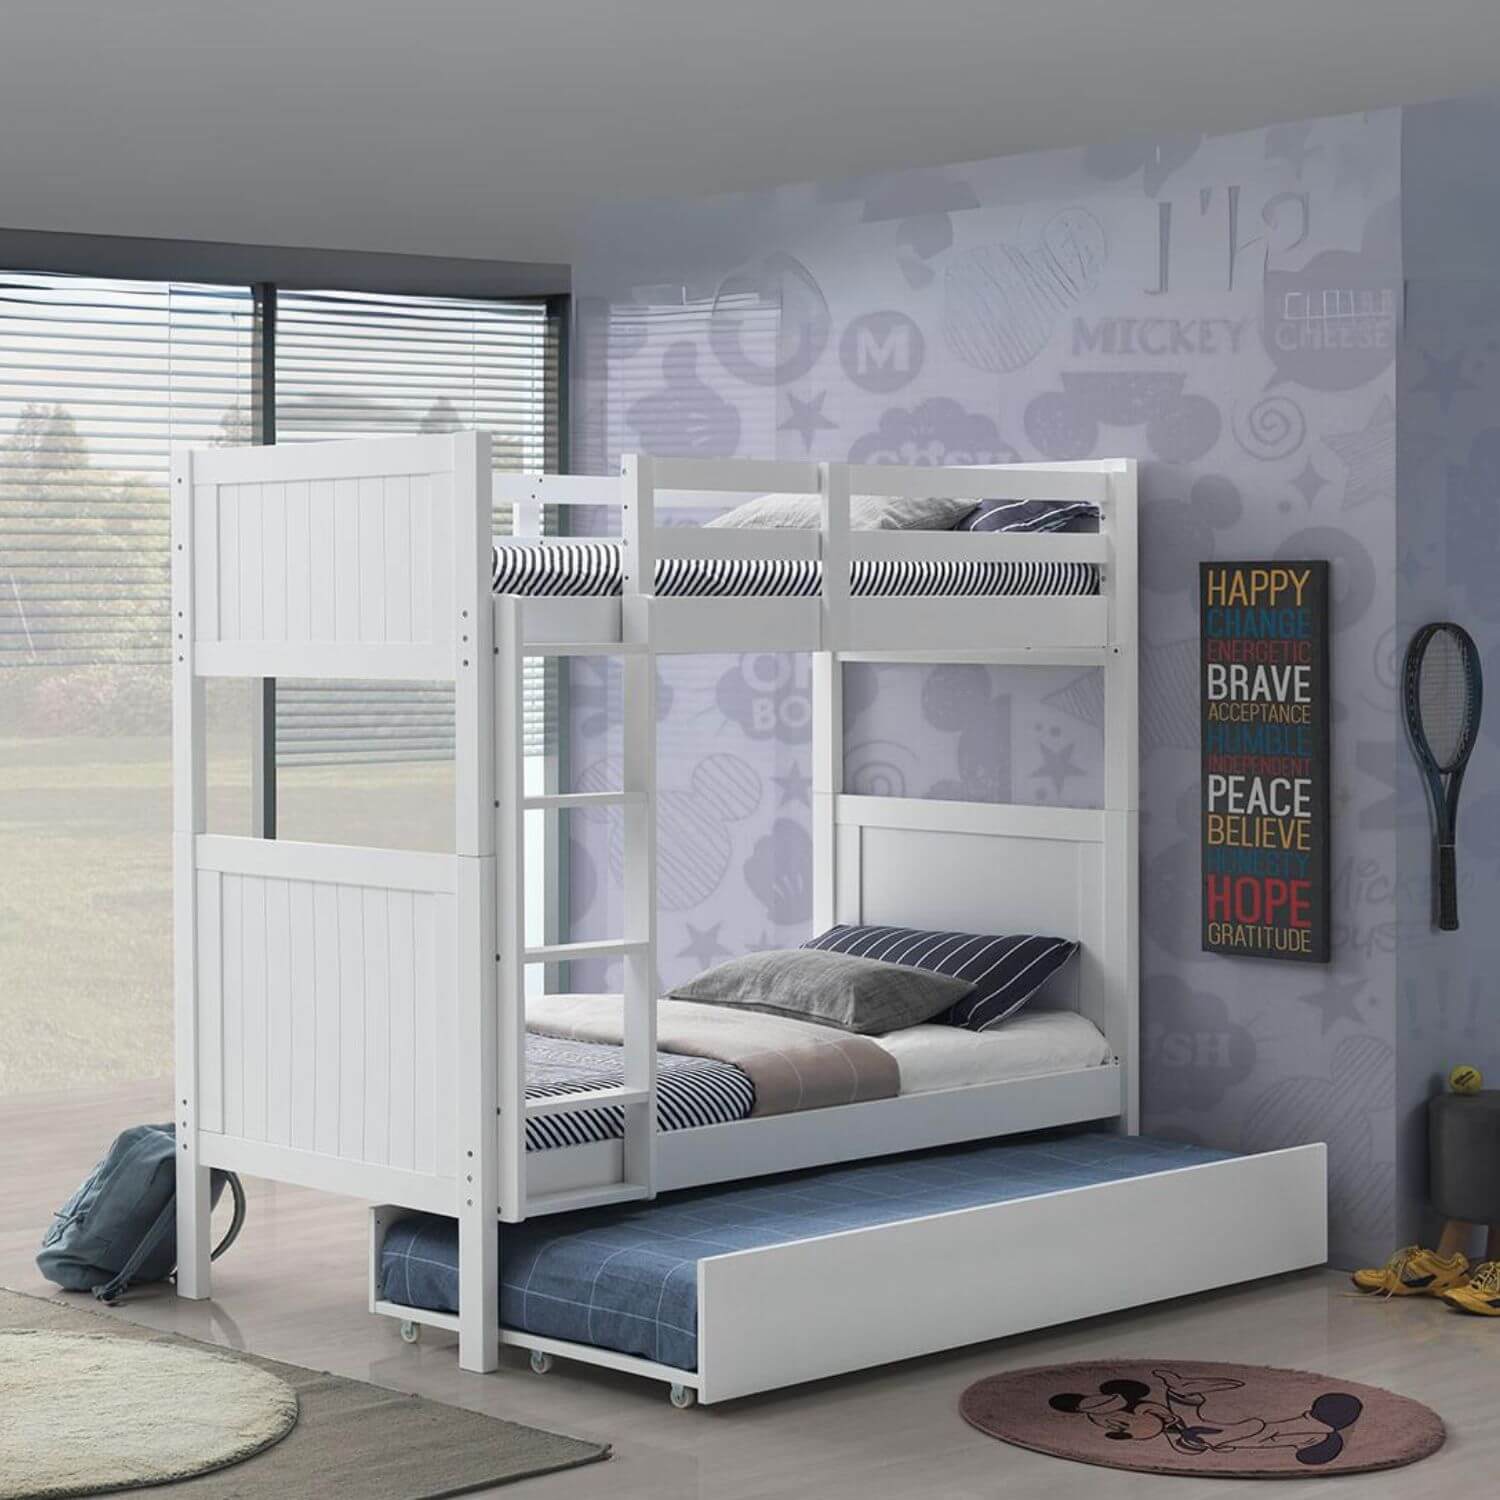 Orbelle Bunk Bed Model 2022 Gray - Lifestyle